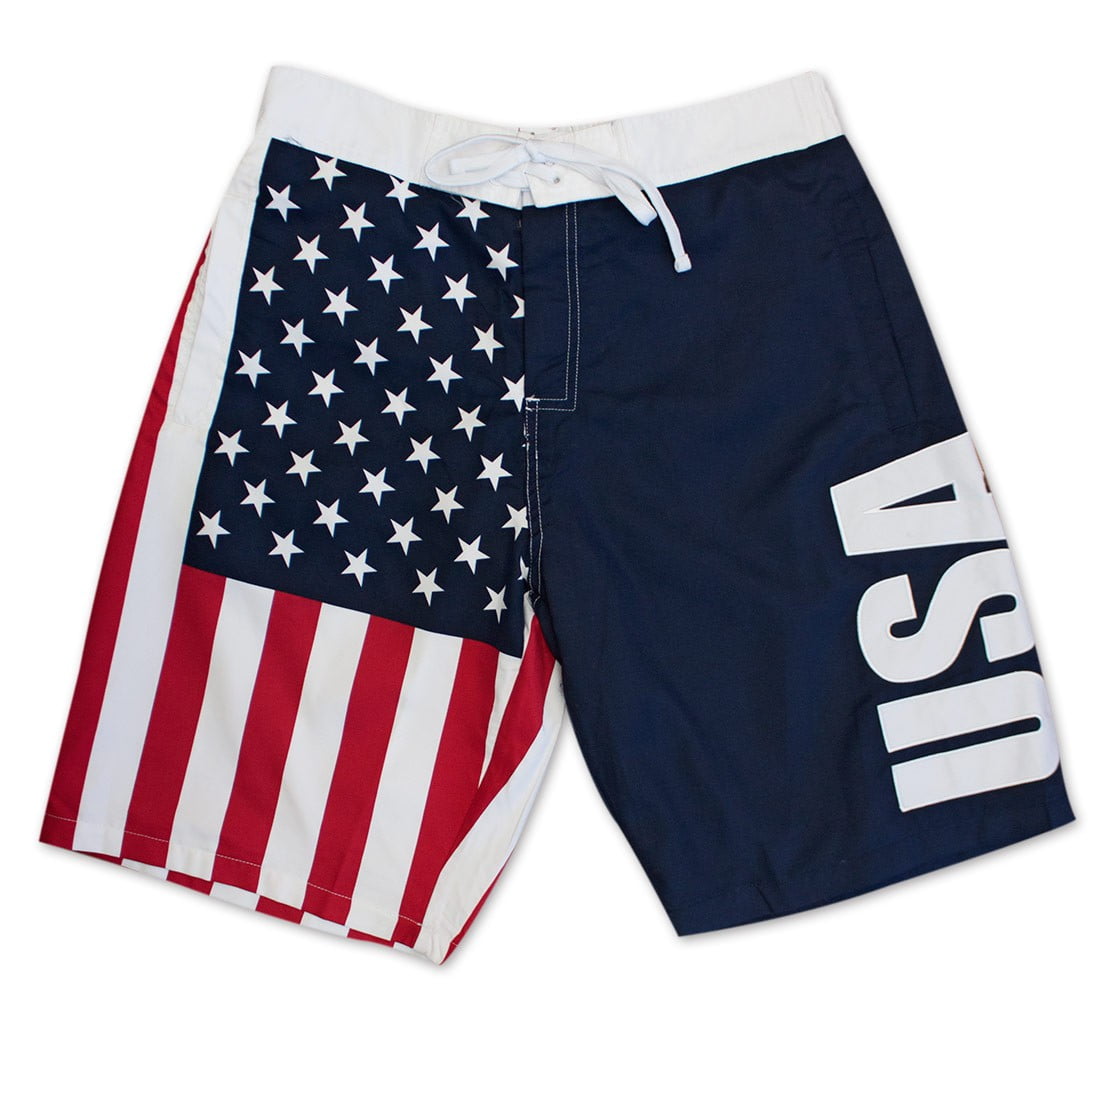 Papa Flag Mens Fashion Board/Beach Shorts Casual Classic Bathing Suit with Pockets